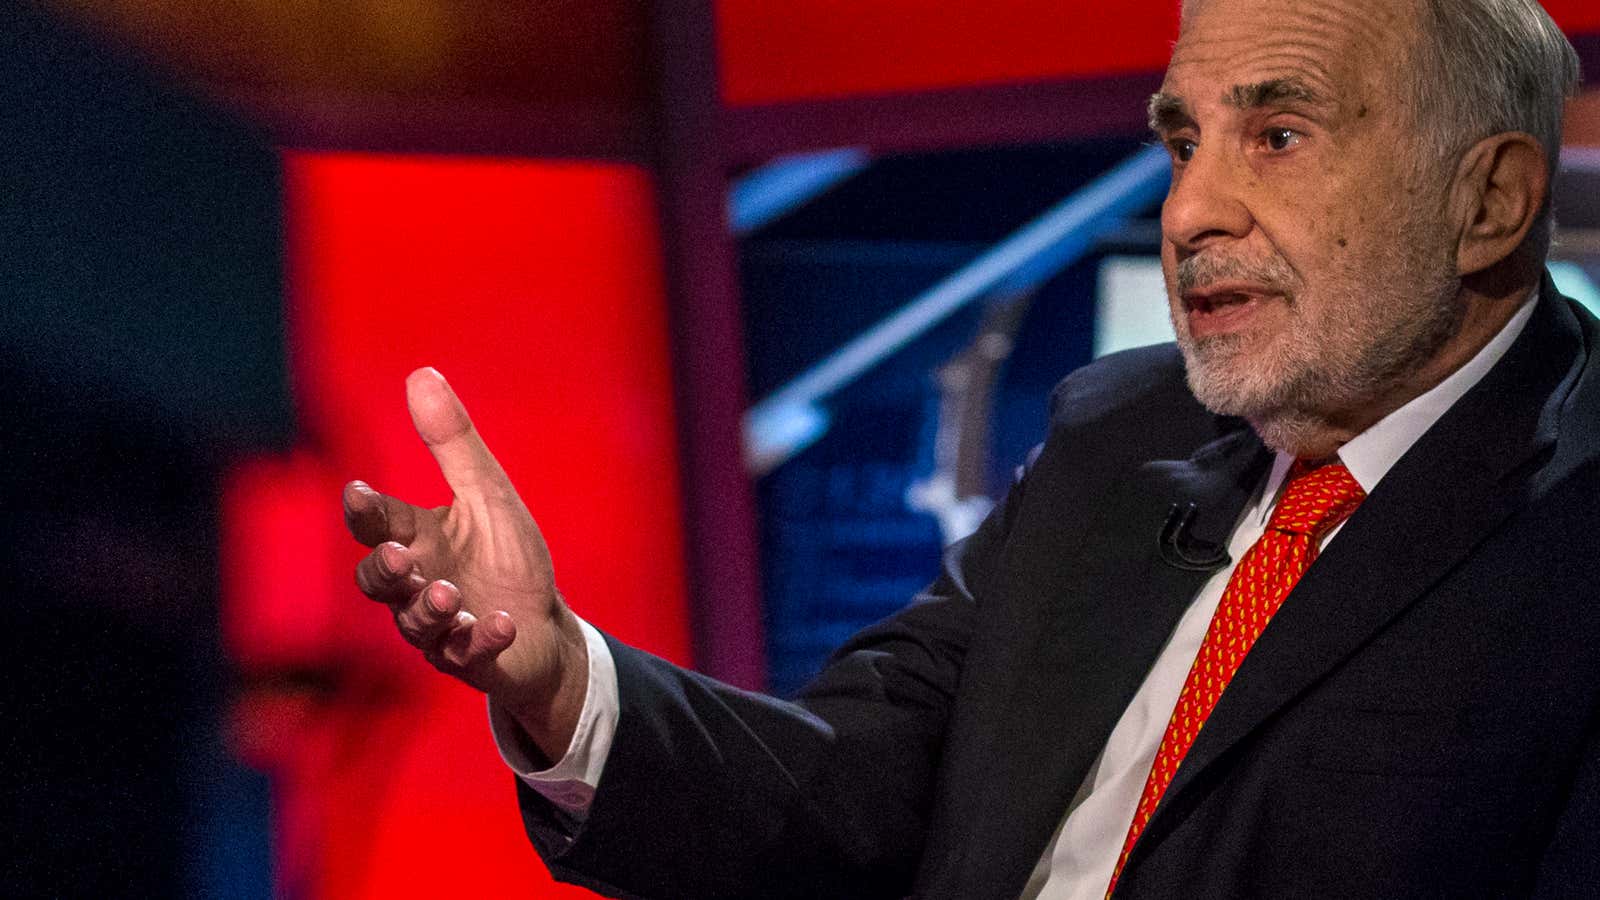 Trump’s billionaire special adviser Carl Icahn is one of the men Passantino recently worked for.